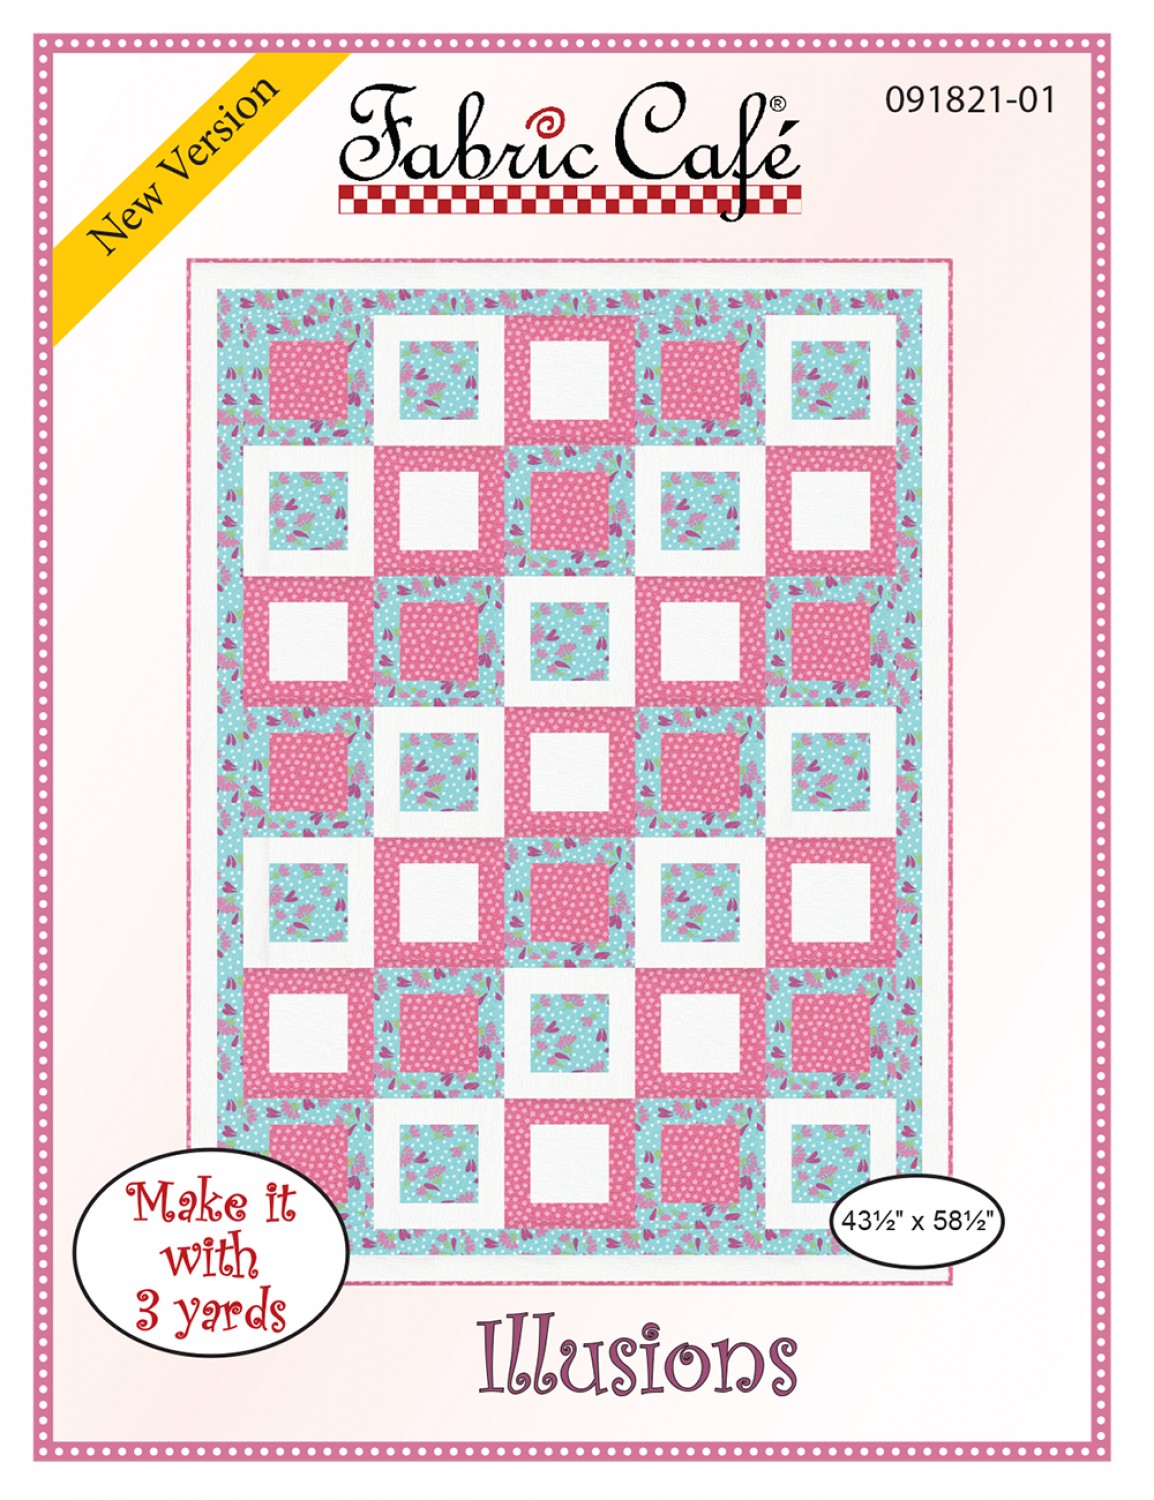 Illusions Quilt Pattern by Fabric Cafe